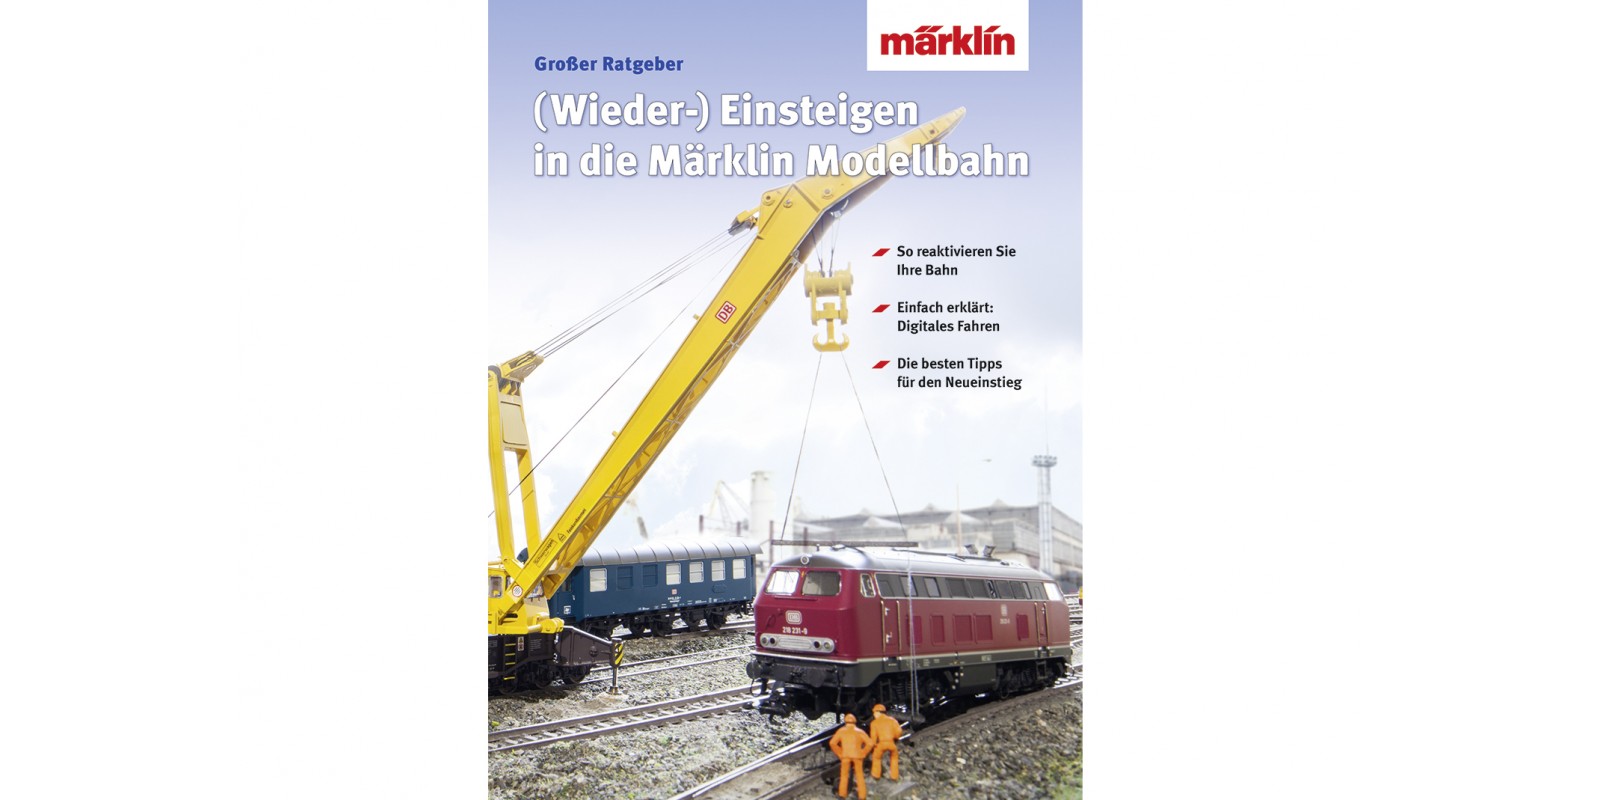 03070 Book "Returning/Changing Over to Digital Model Railroading"